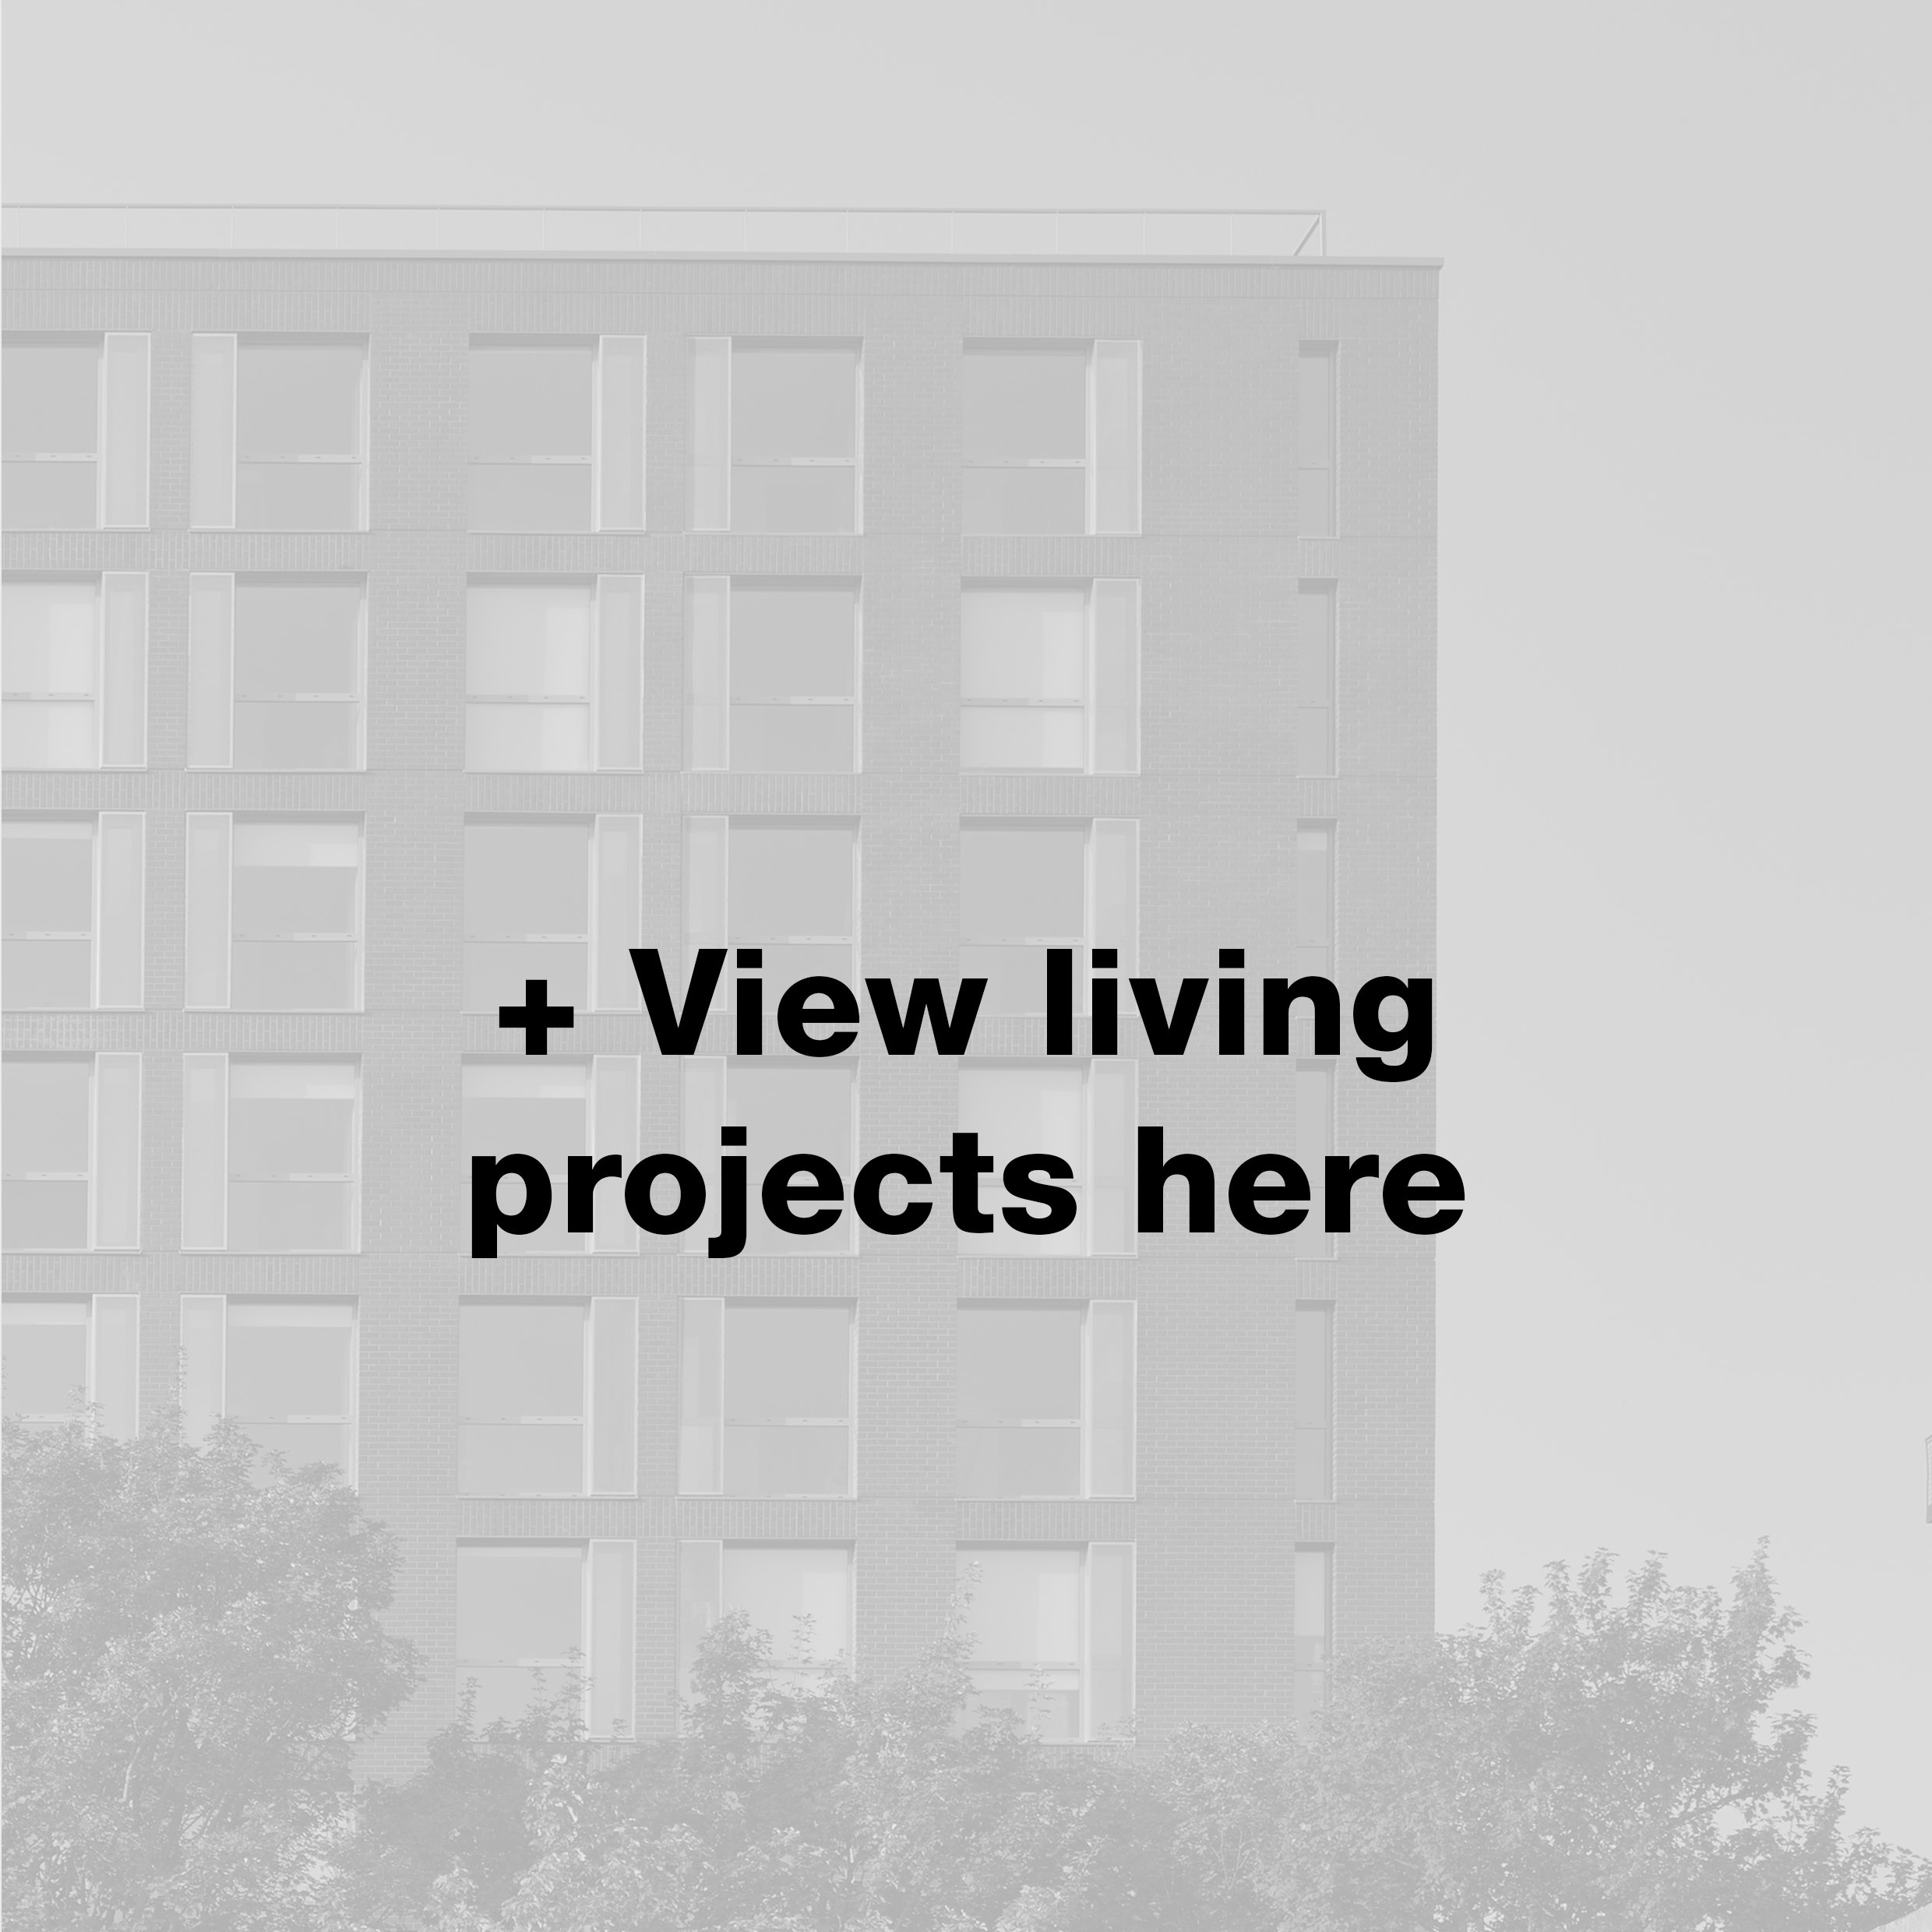 living-projects-here.jpg#asset:10531